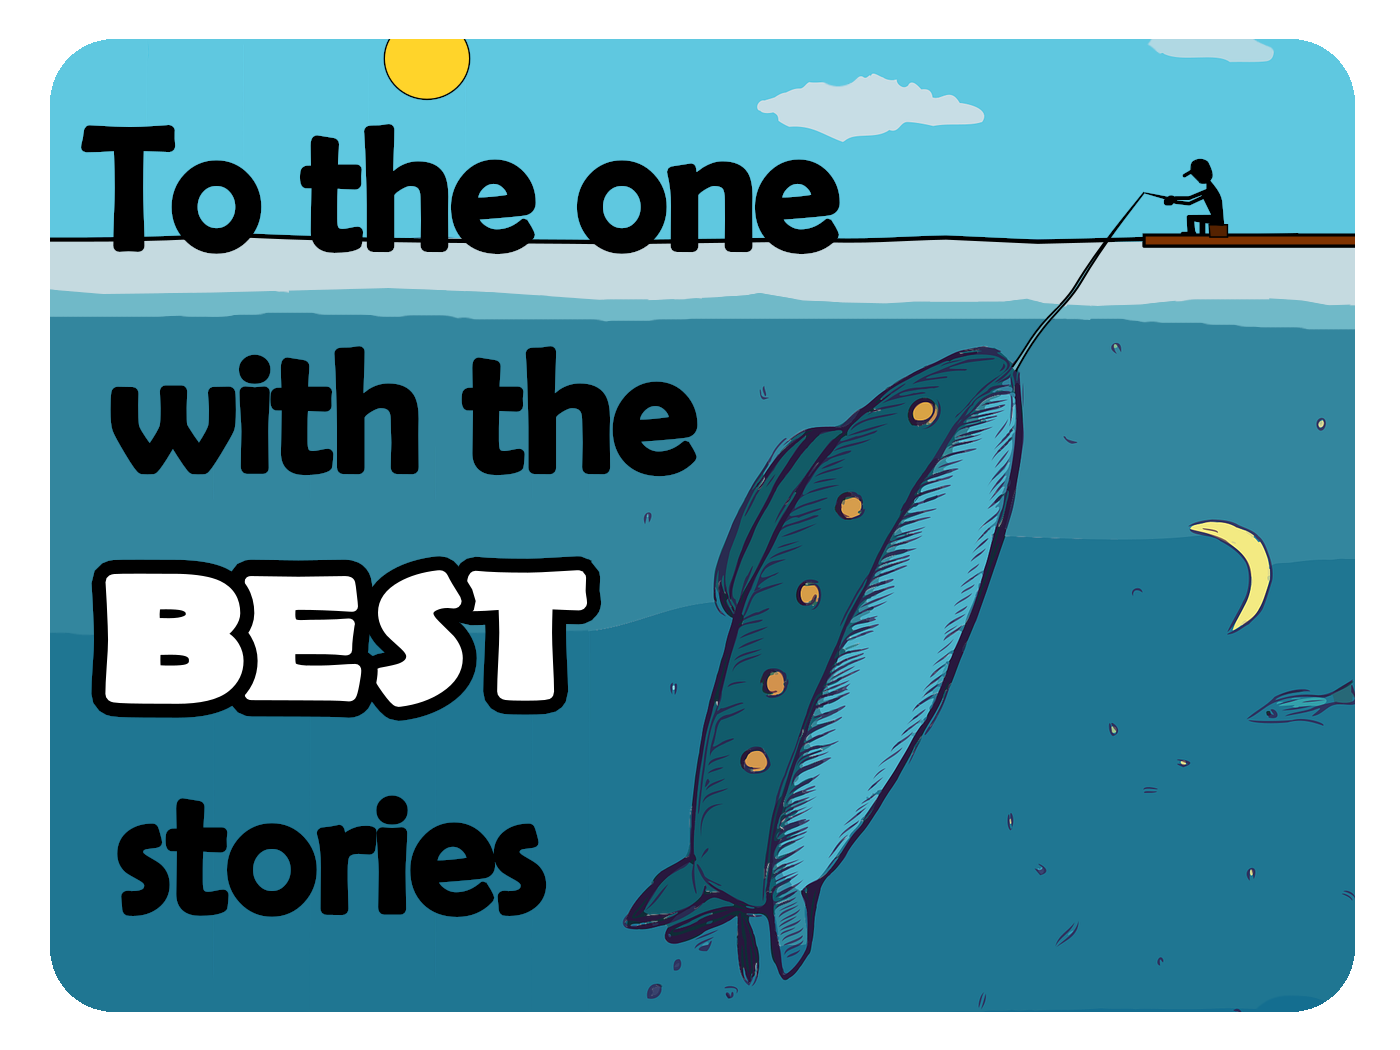 The Best Stories